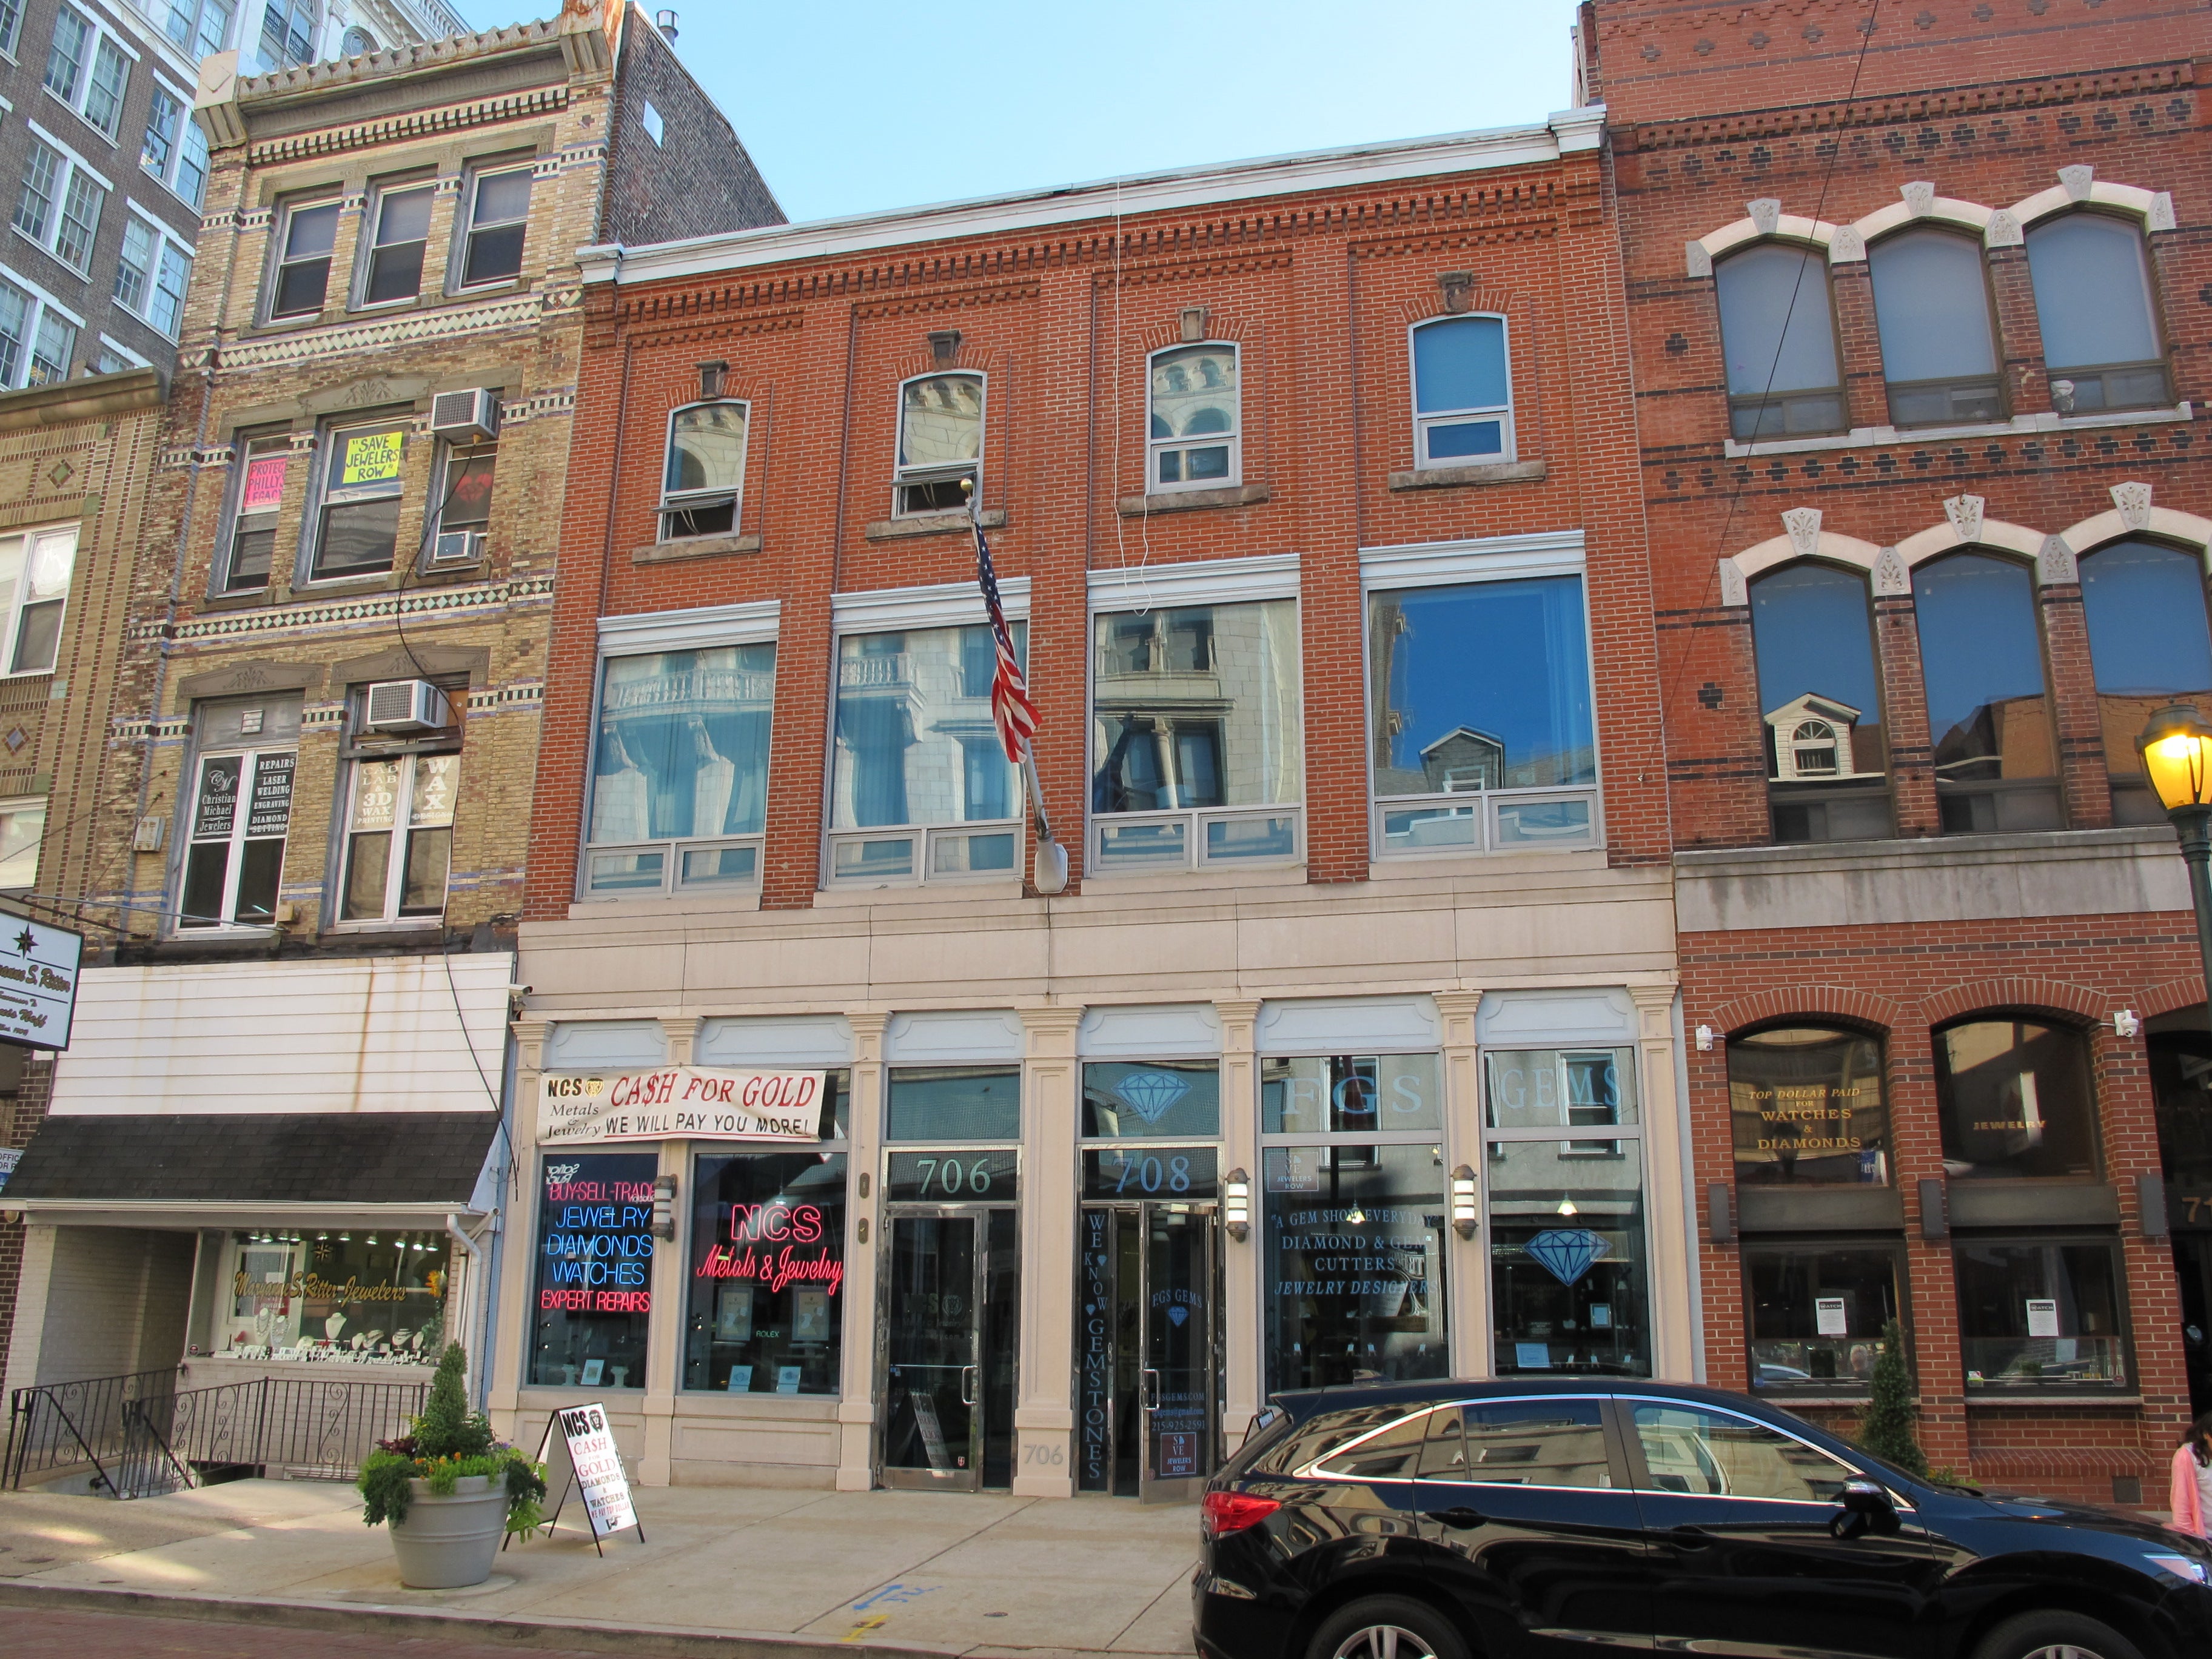 Jewelers' Row (704-708 Sansom St.), as it appeared in September 2016.